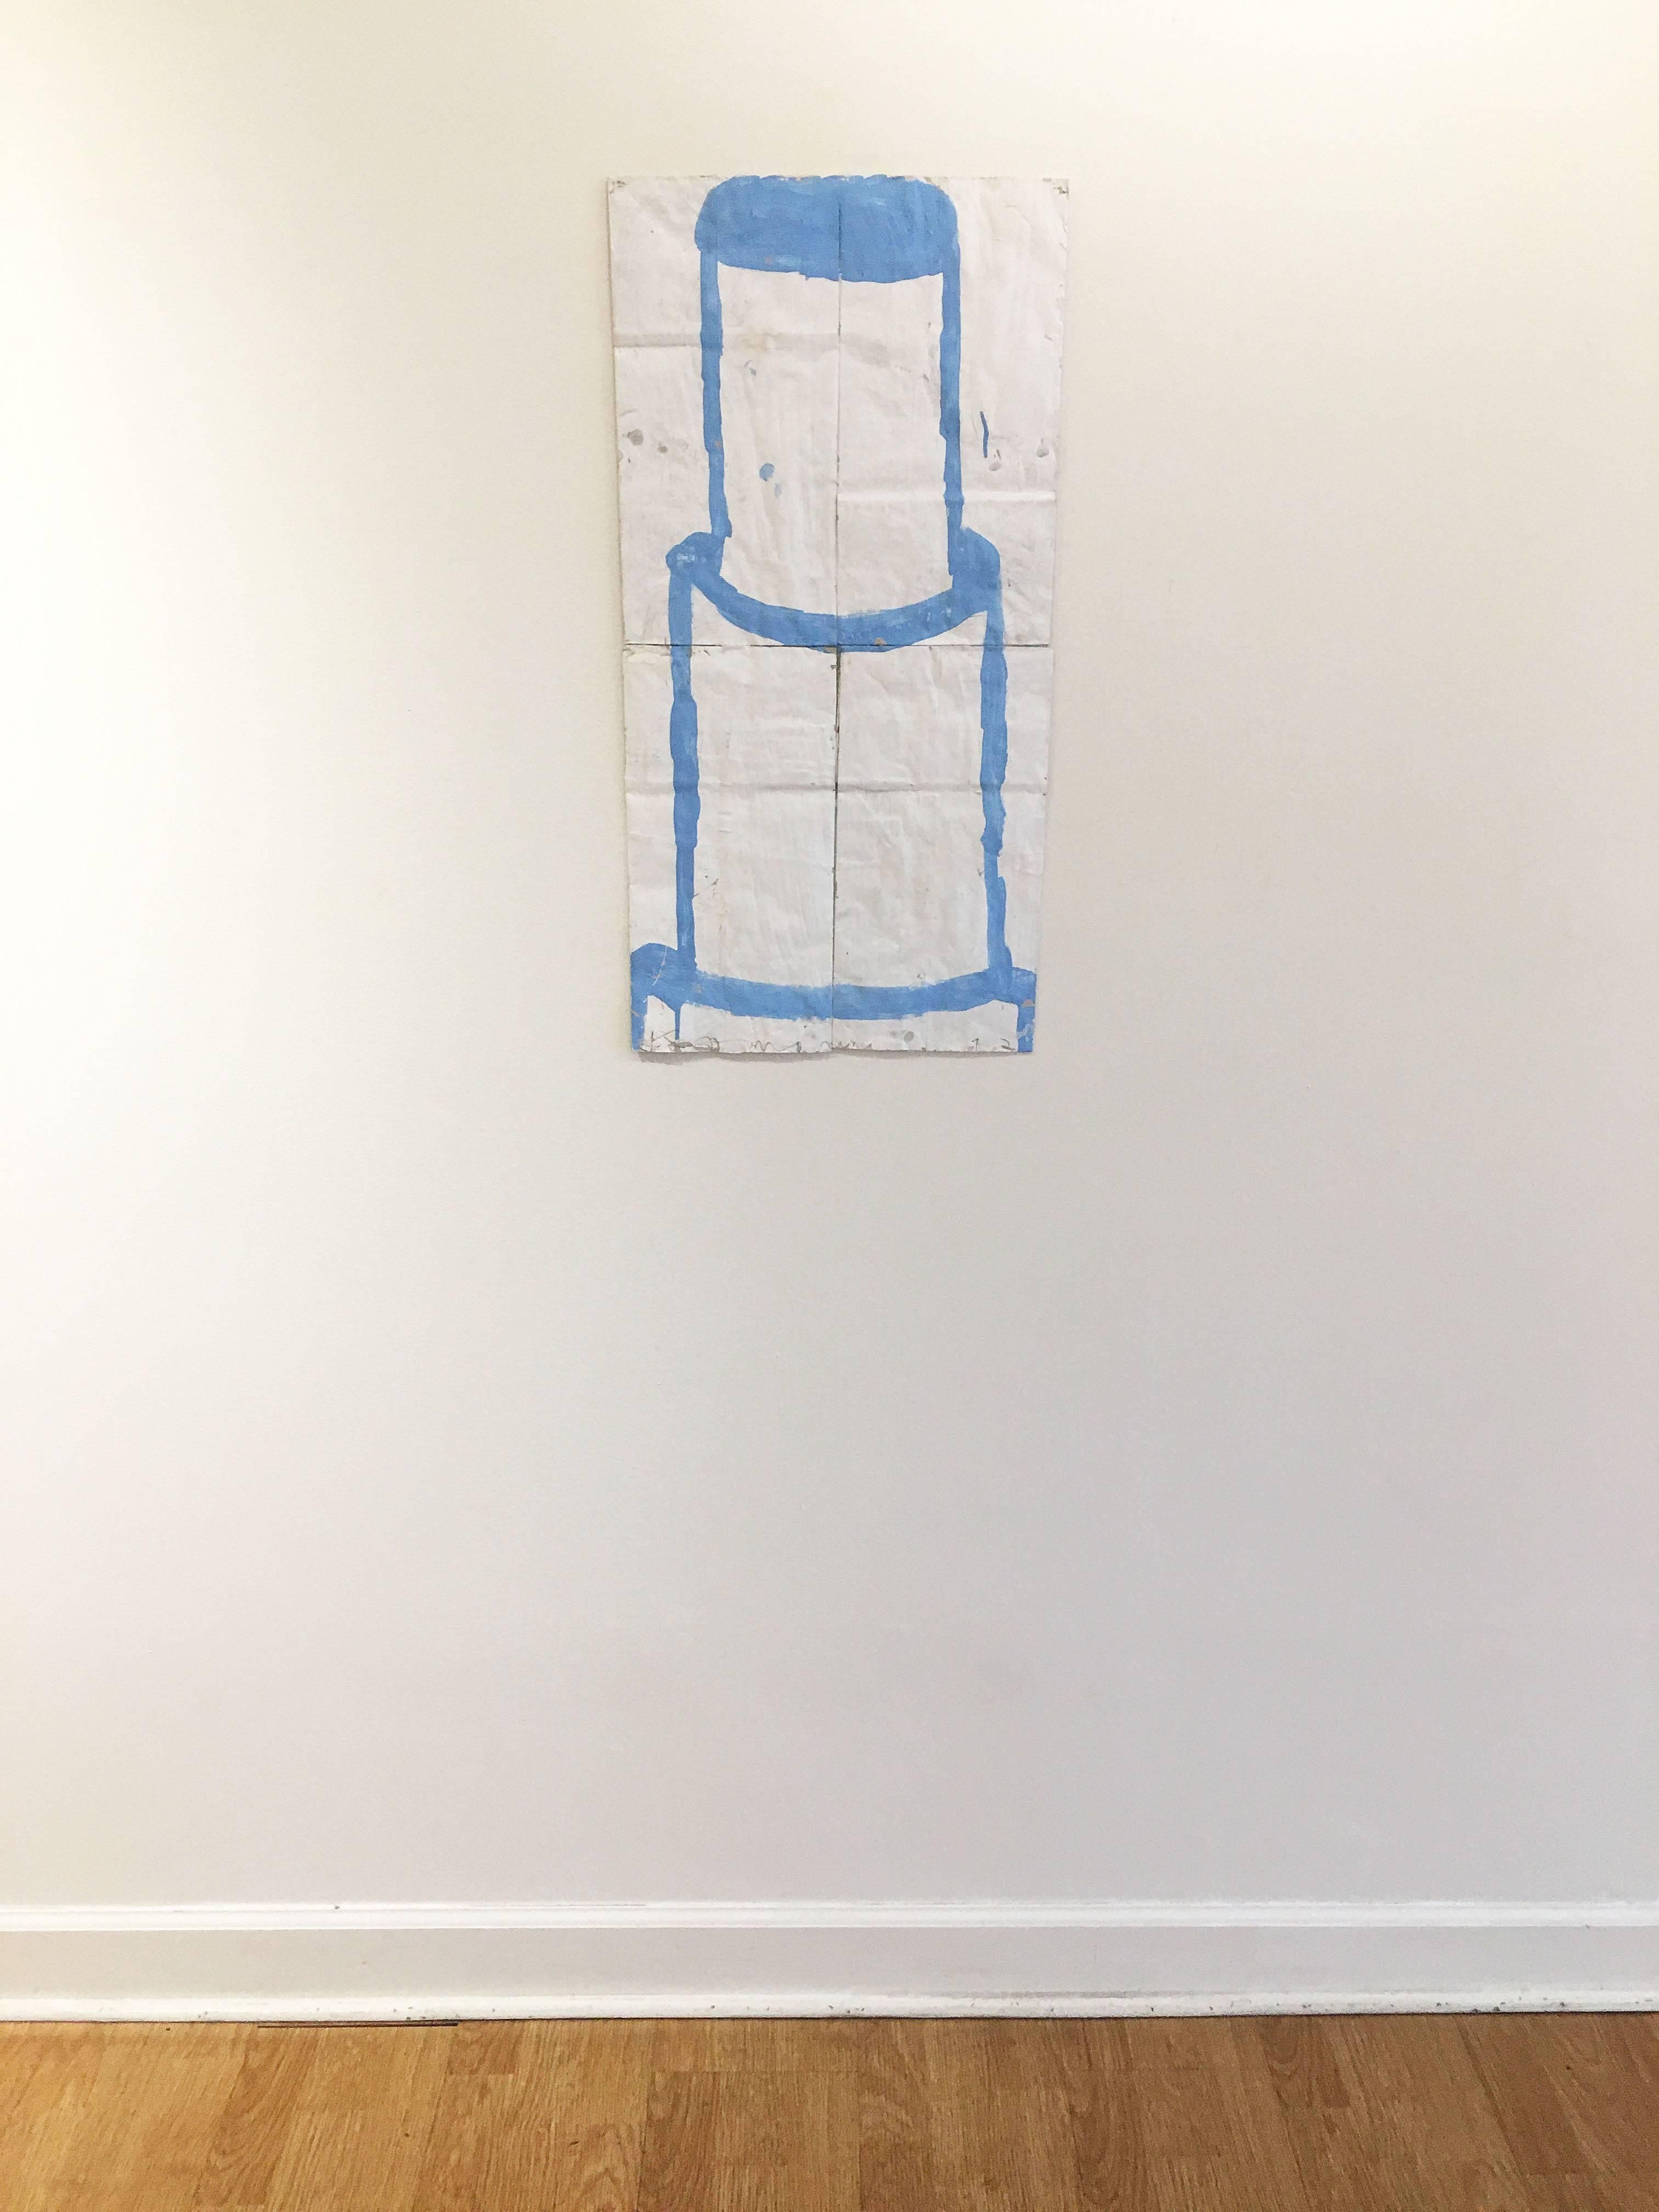 'Cake (light blue)' by contemporary artist, Gary Komarin, 2015. Acrylic on paper bags, 27.5 x 14 inches. The faux naive style painting of a outlined, three tier cake in light blue is on a white background. 

Born in 1951 in New York City, Gary